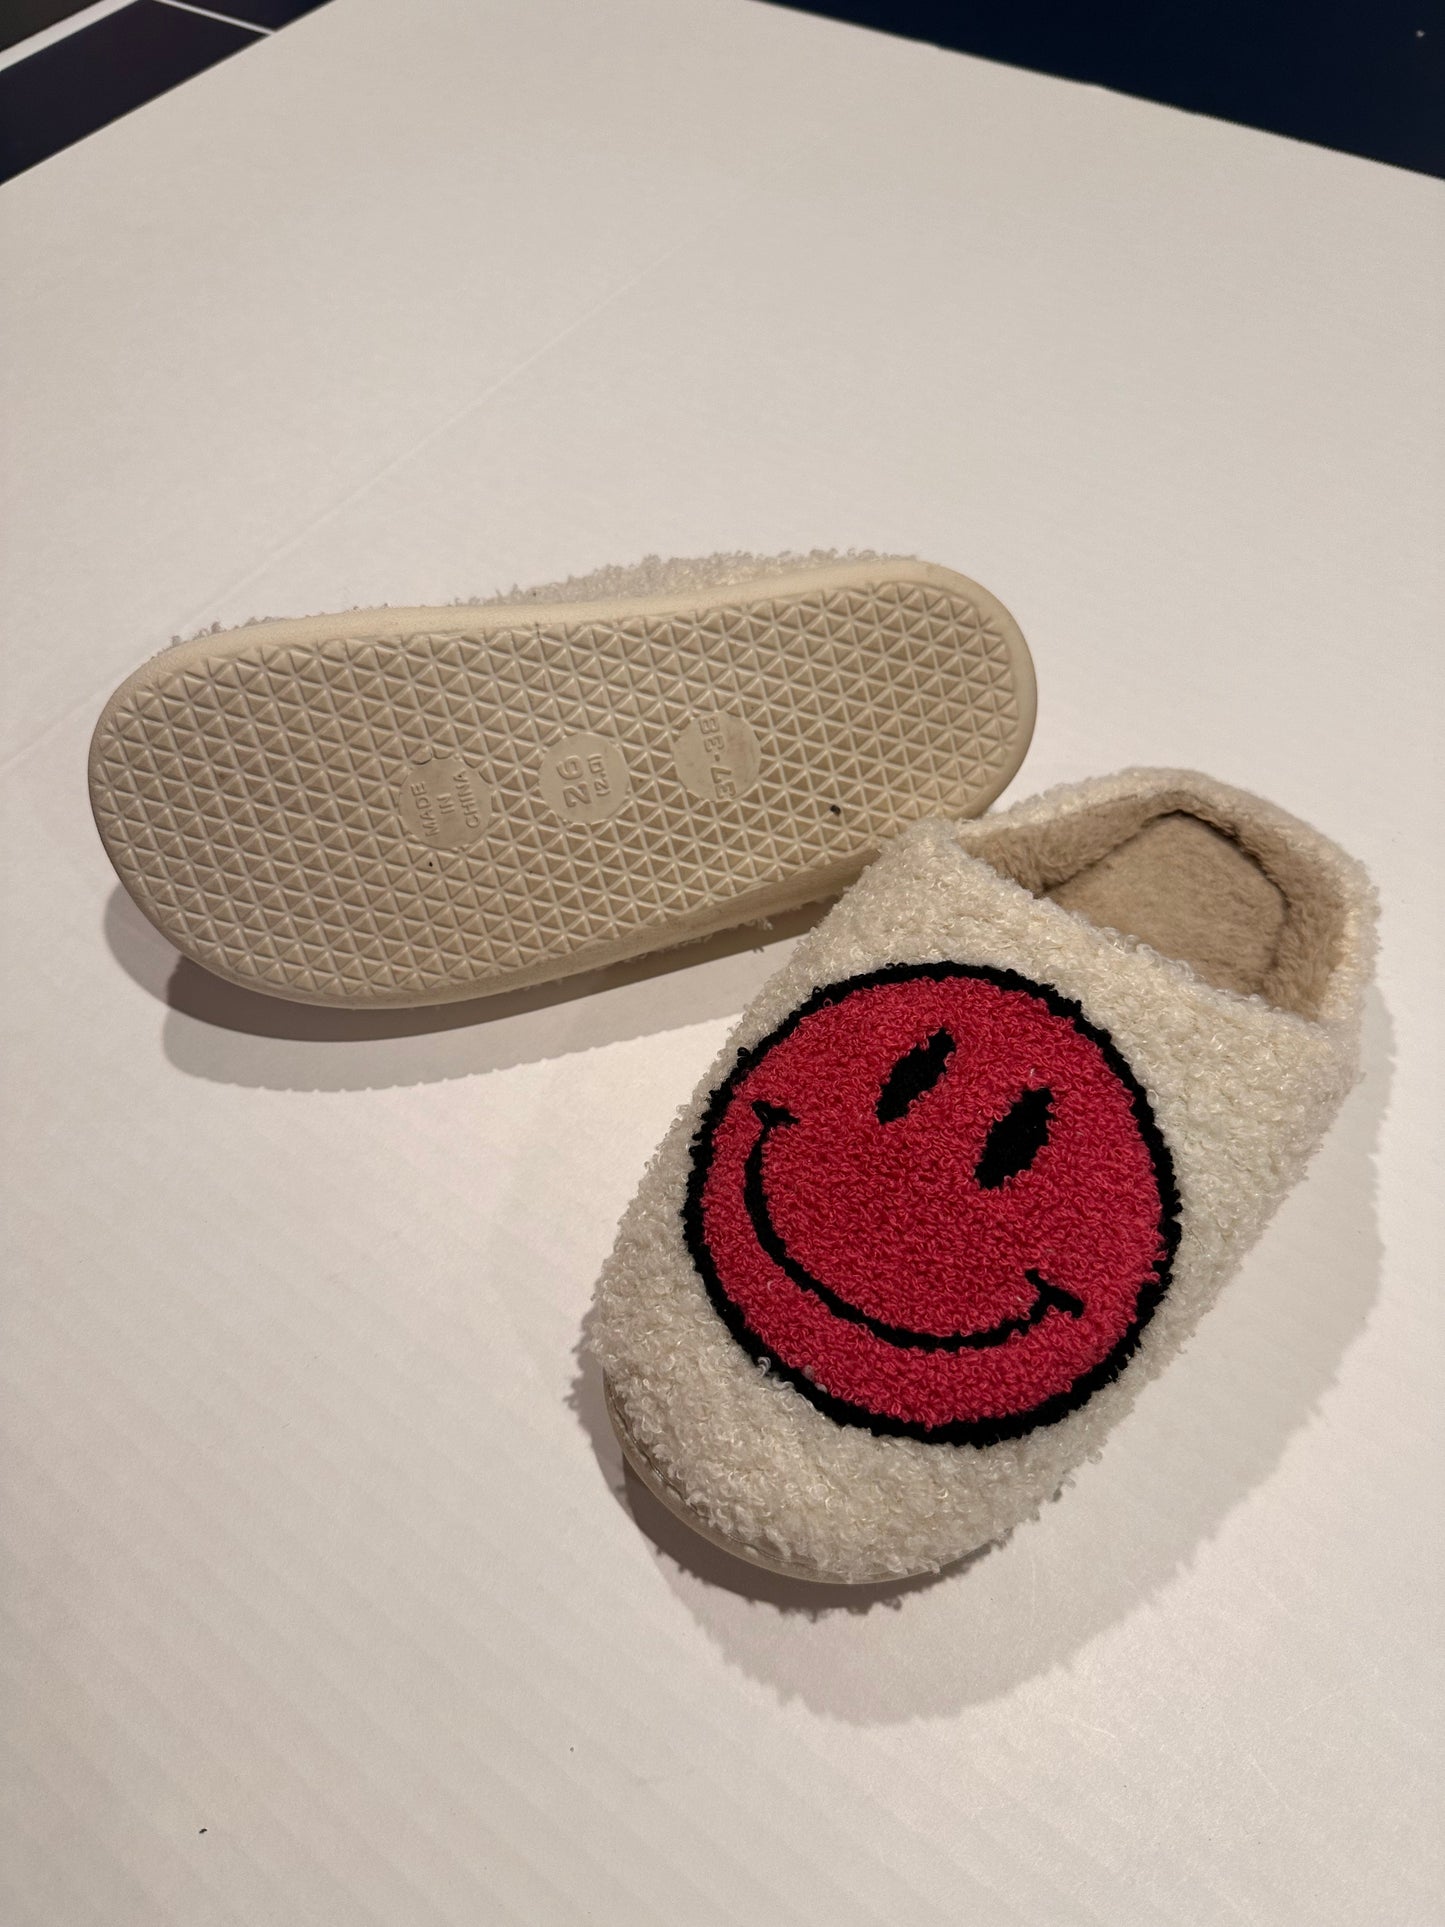 Women's Altr'd State Slippers Pink smiley face size 37-38